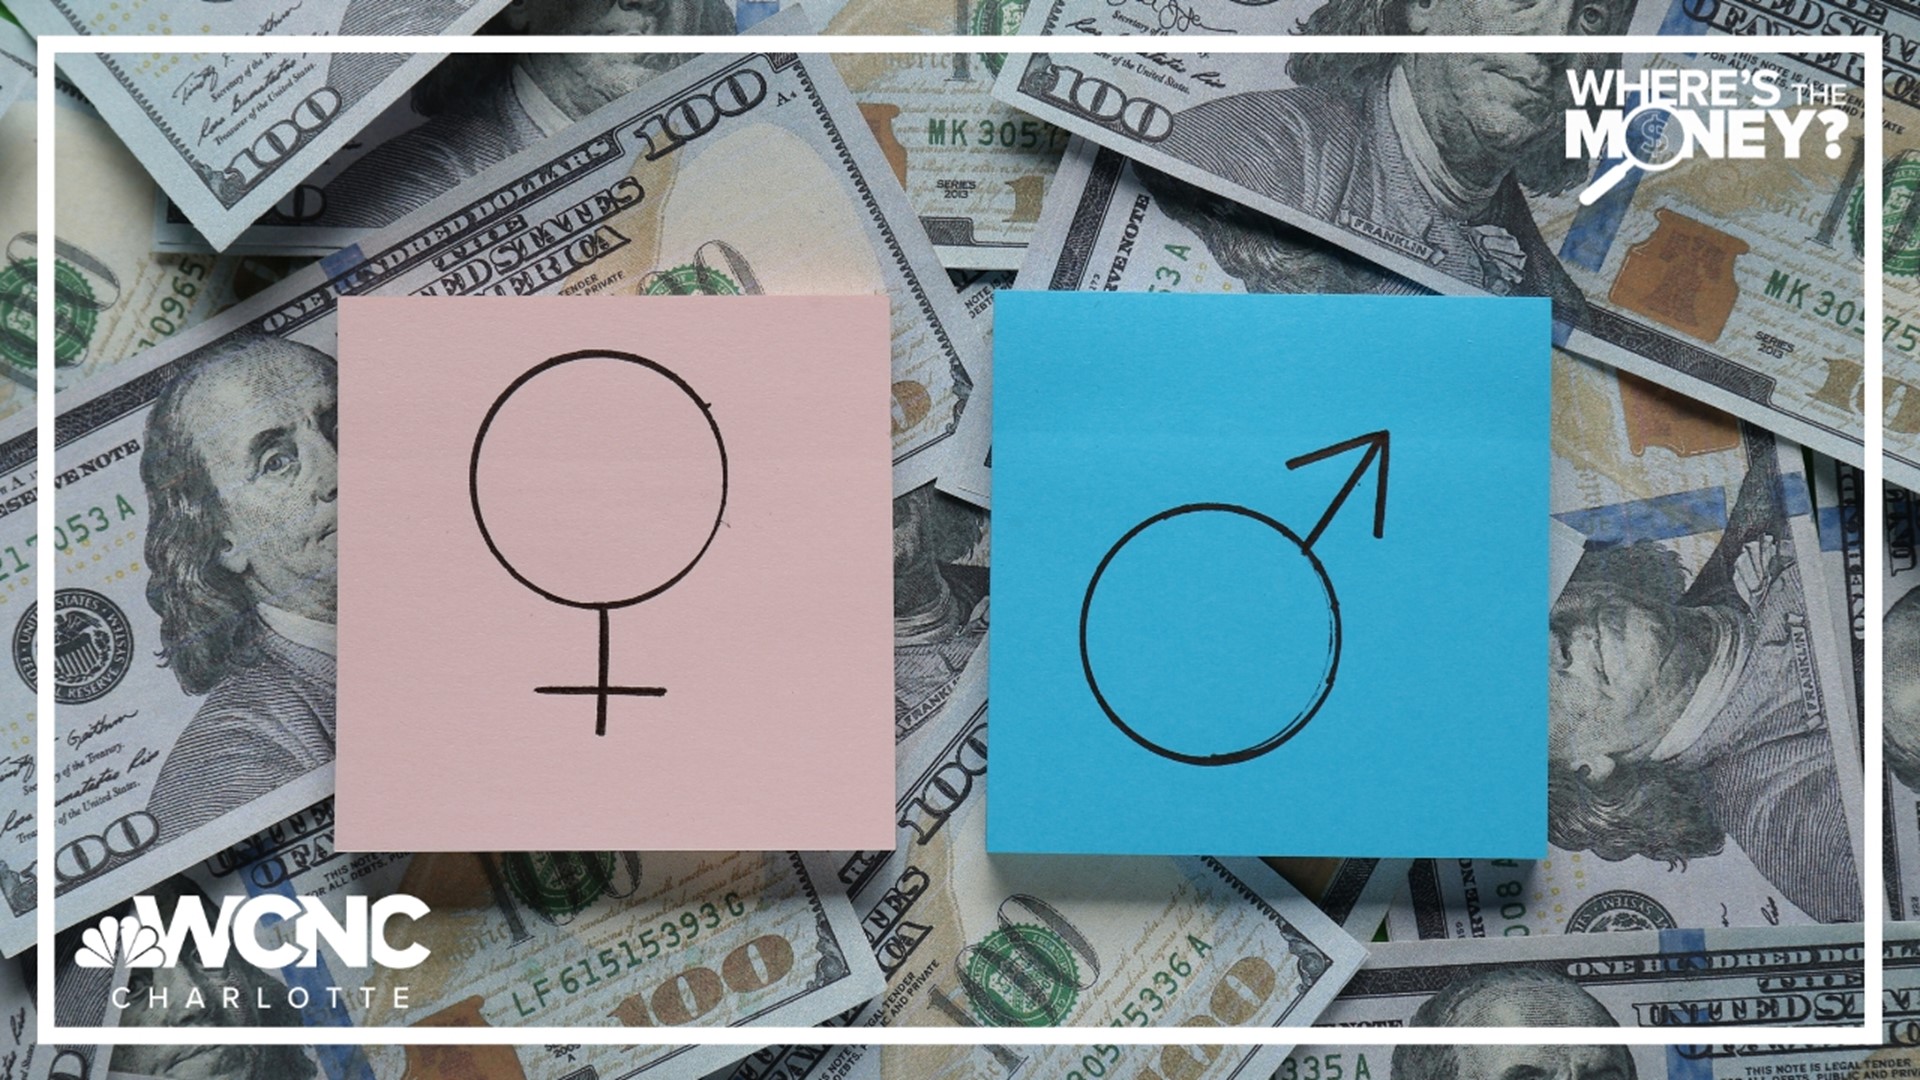 Pew Research shows in 2022, women earned 82 cents for every dollar earned by men.